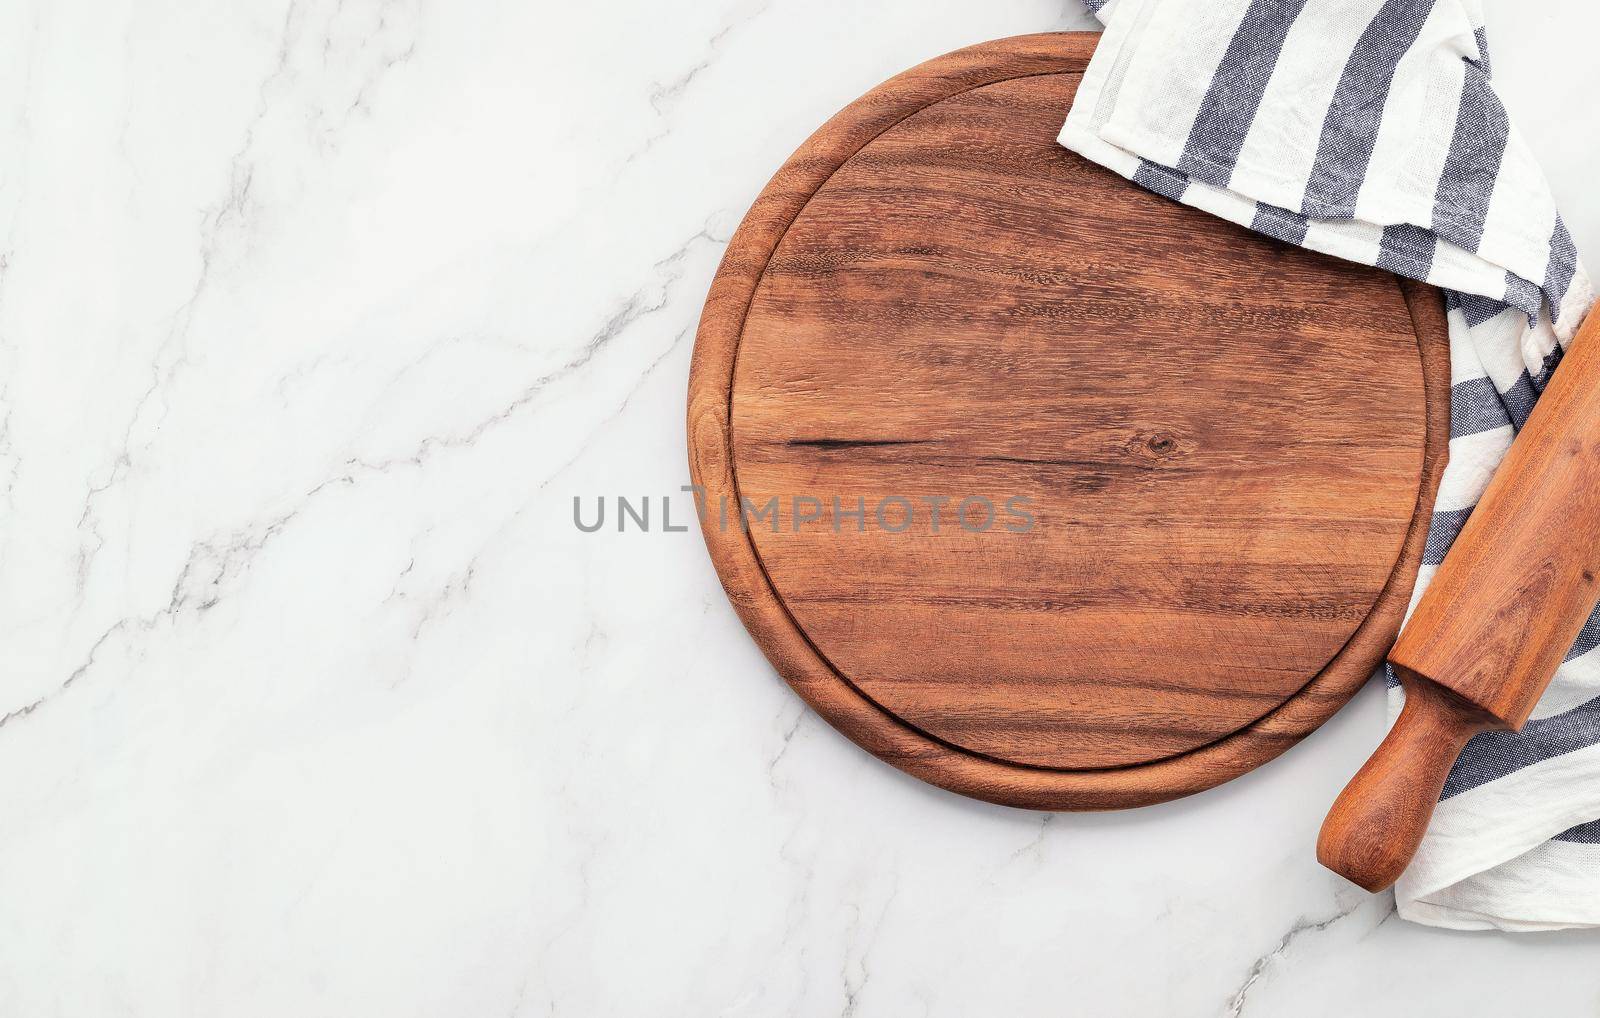 Empty wooden pizza platter with napkin and rolling pin set up on marble stone kitchen table. Pizza board and tablecloth on white marble background. by kerdkanno